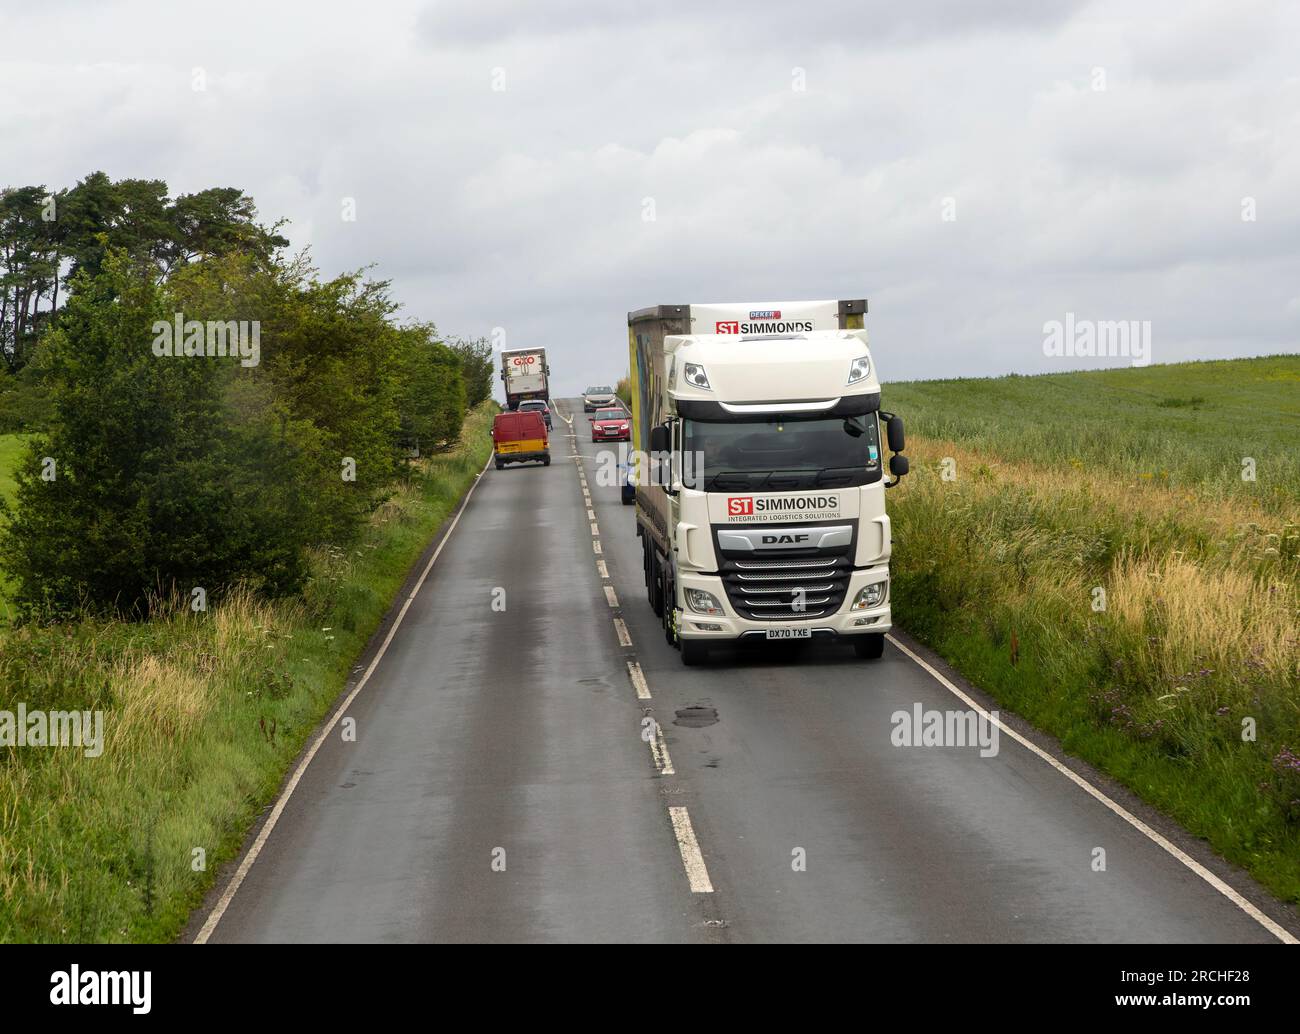 Simmonds integrated logistics solutions truck lorry heavy goods vehicle A346 road, Chiseldon, Wiltshire, England, UK Stock Photo